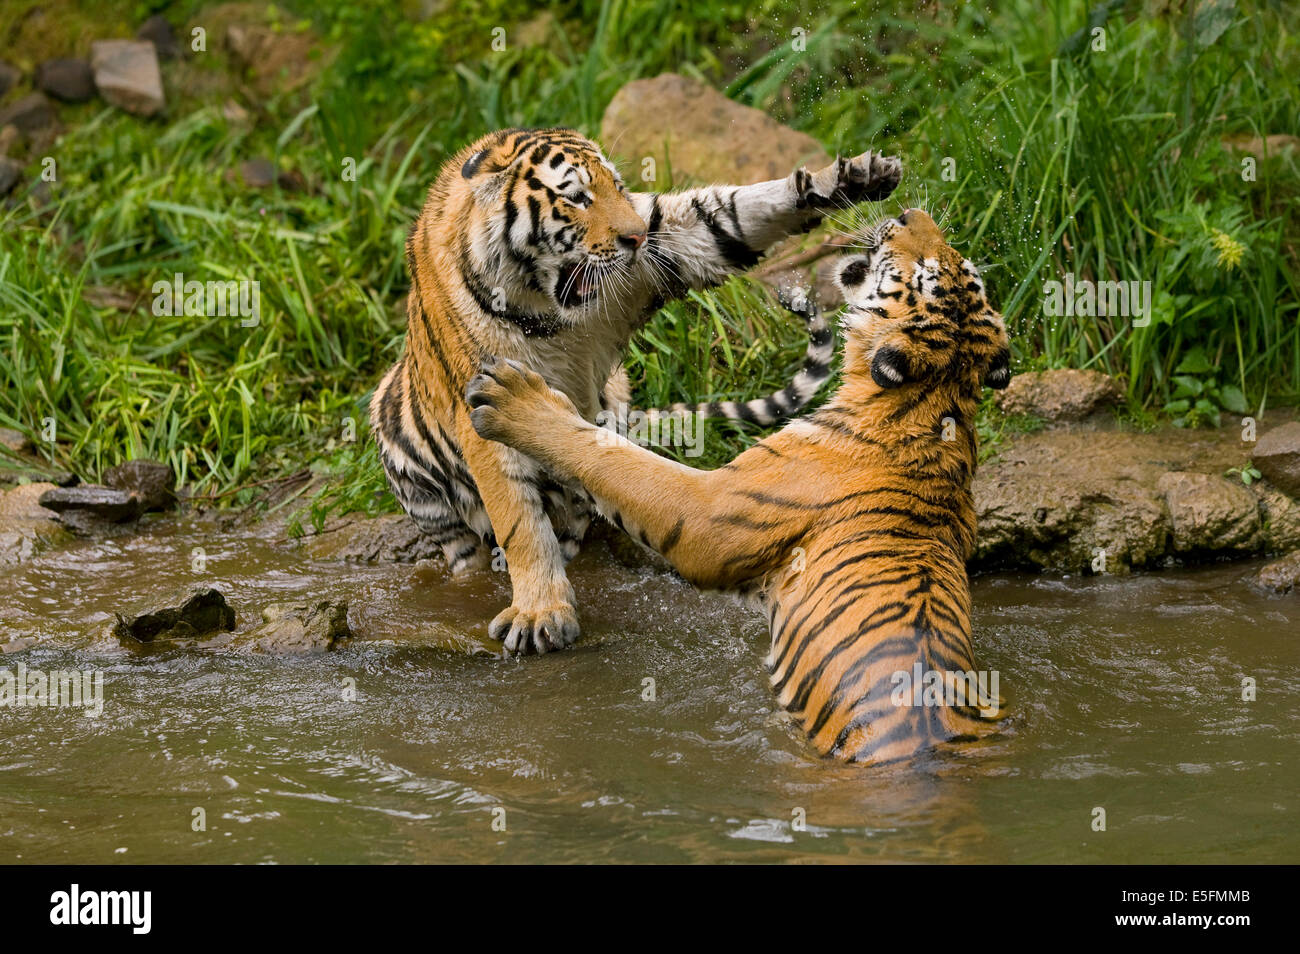 Bengal tiger cubs play fighting - Stock Image - C041/0614 - Science Photo  Library